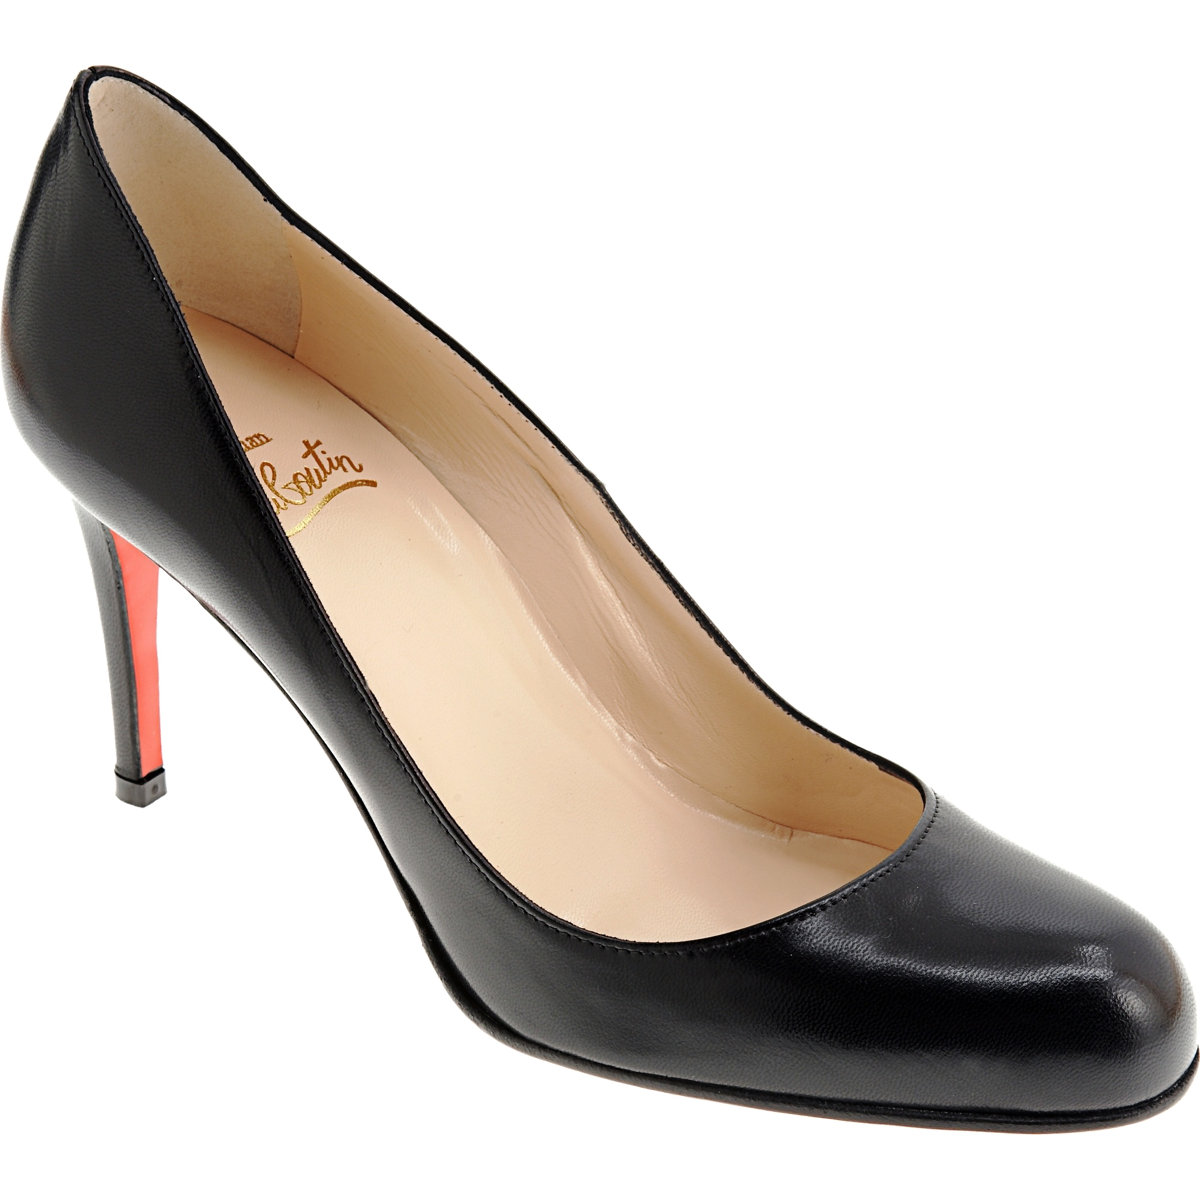 spiked christian louboutin loafers - christian louboutin simple pump 85